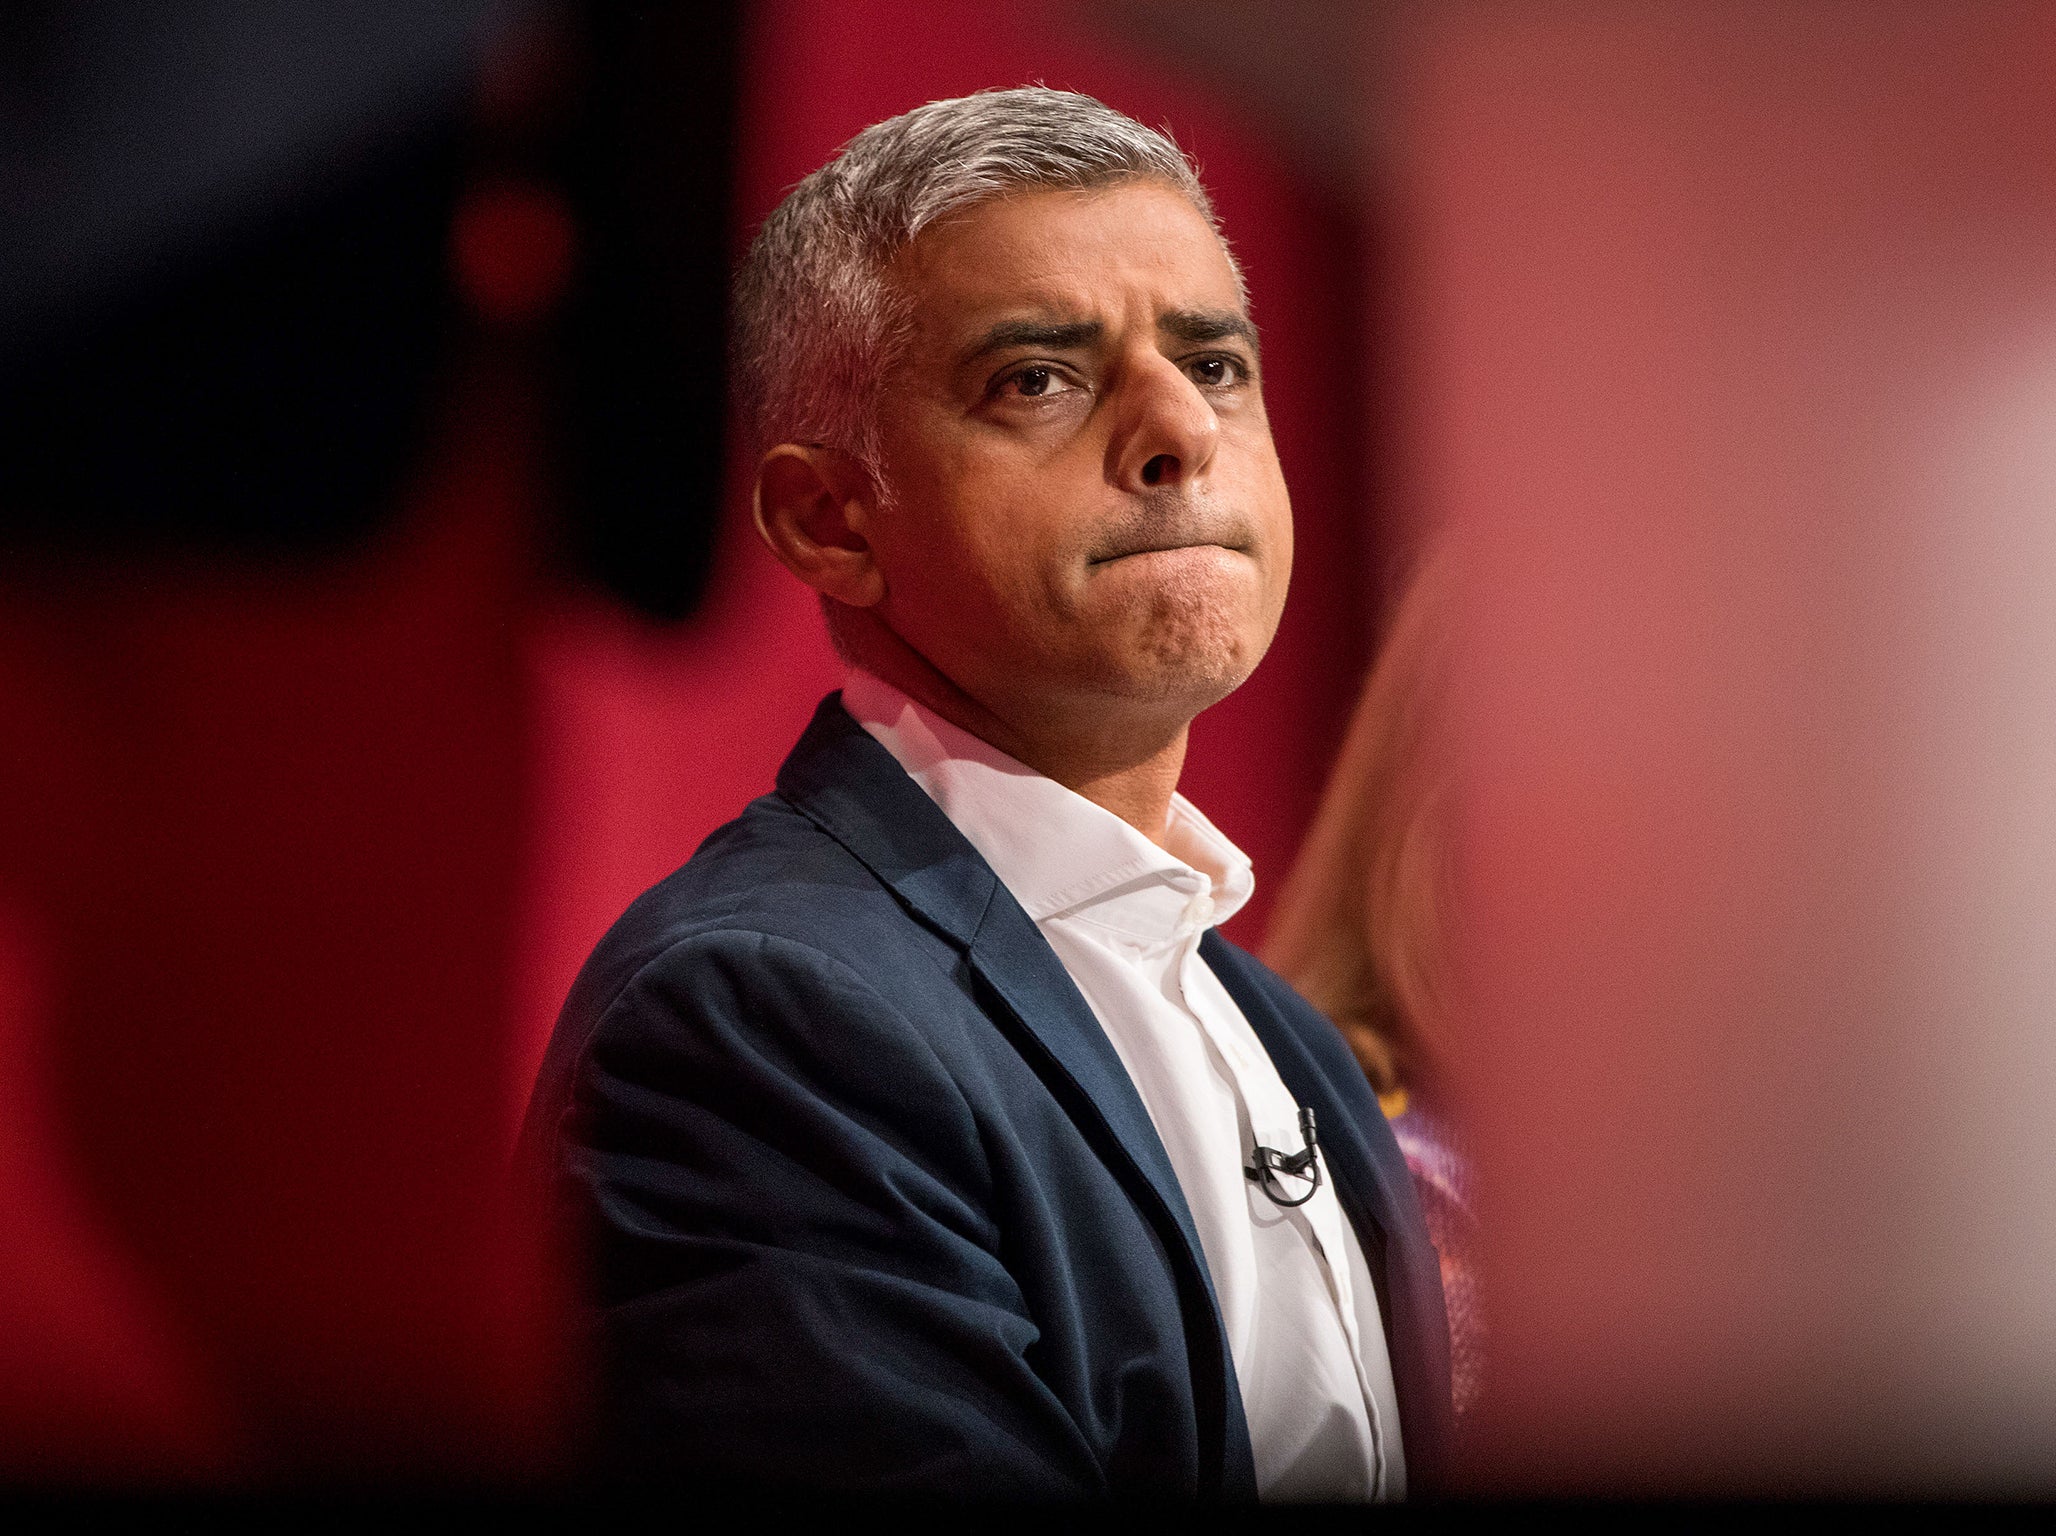 Windrush scandal directly linked to Conservative immigration policy, says Sadiq Khan